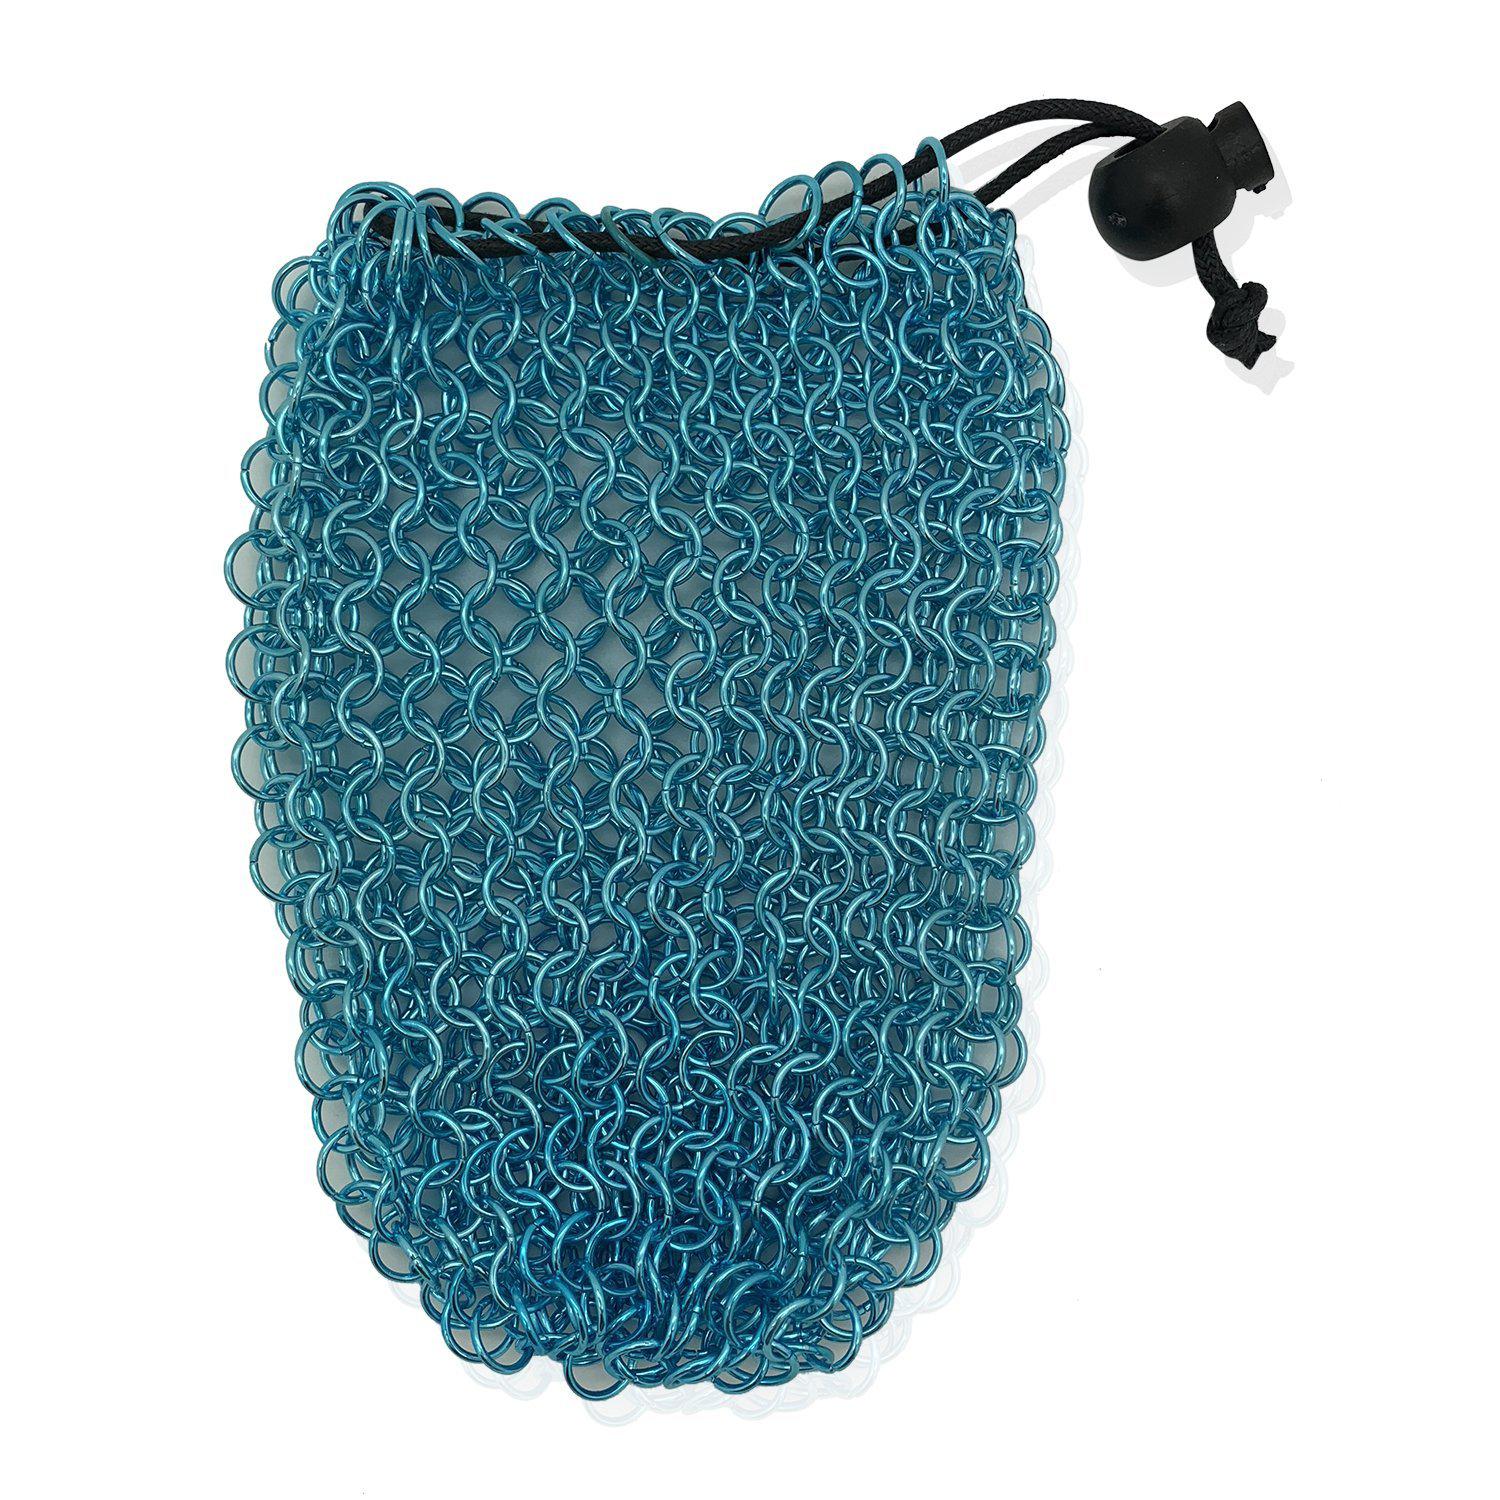 Stainless Steel Chainmail Dice Bag - Teal by Norse Foundry-Dice Bag-Norse Foundry-DND Dice-Polyhedral Dice-D20-Metal Dice-Precision Dice-Luxury Dice-Dungeons and Dragons-D&D-